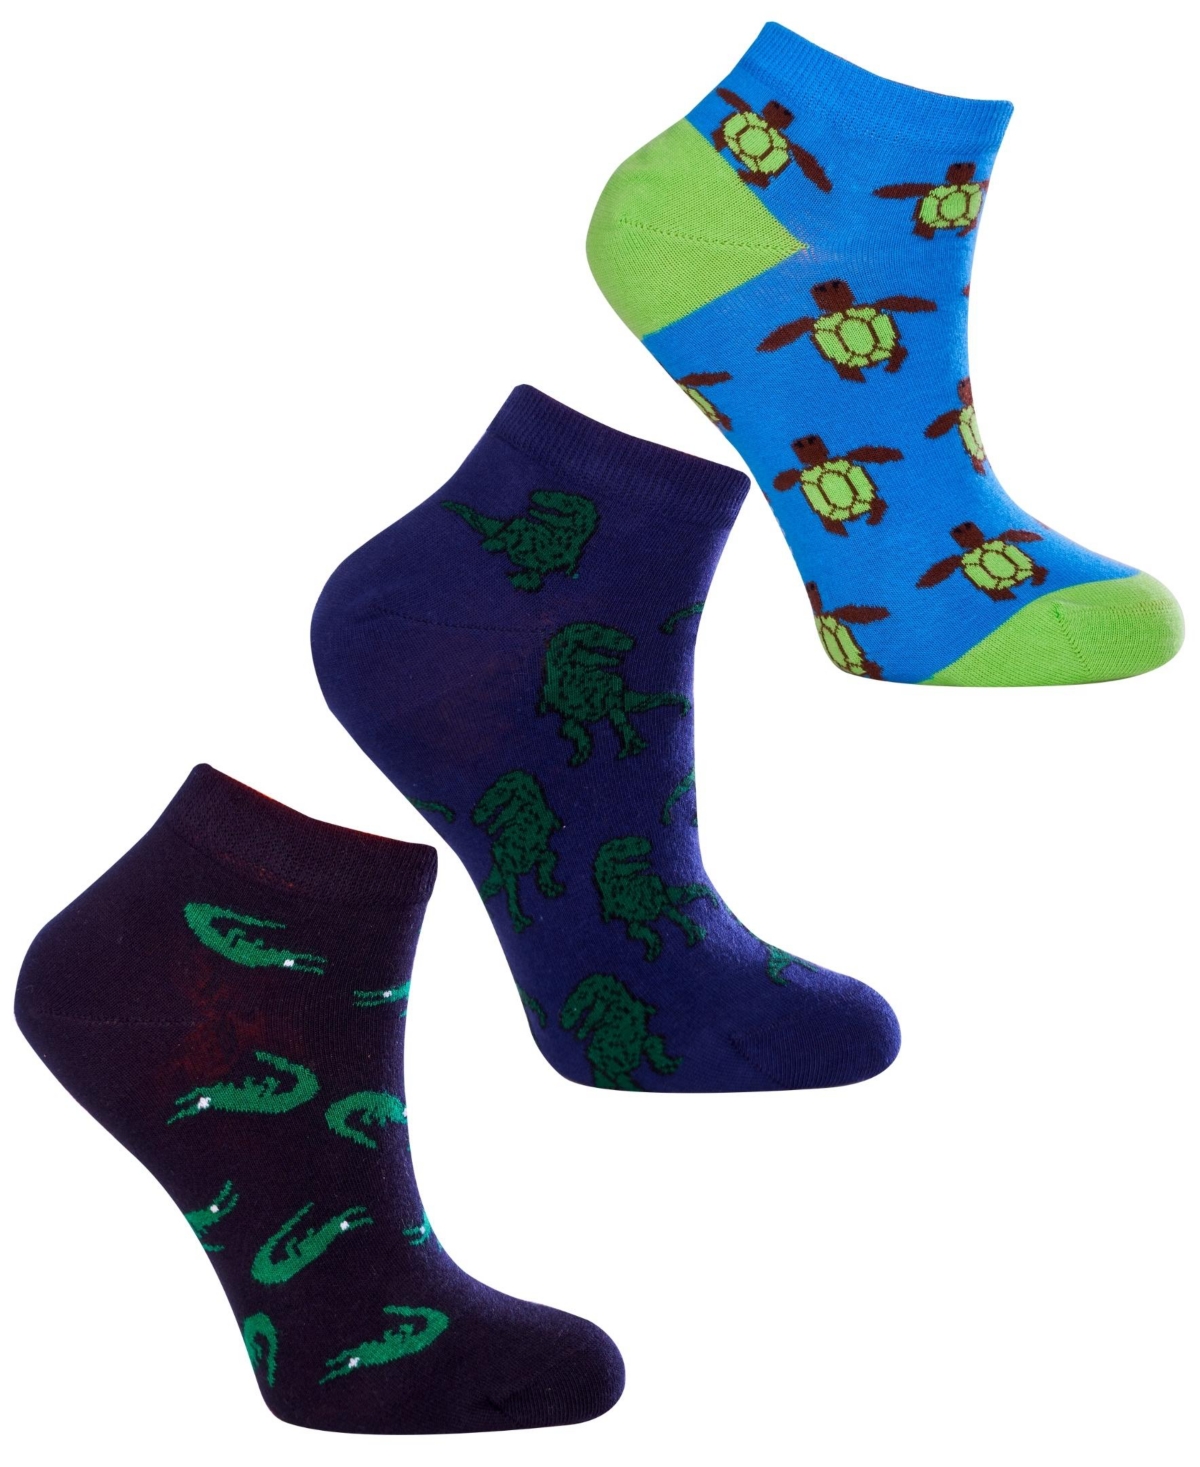 Love Sock Company Women's Ankle Bundle 1 W-Cotton Novelty Socks with Seamless Toe, Pack of 3